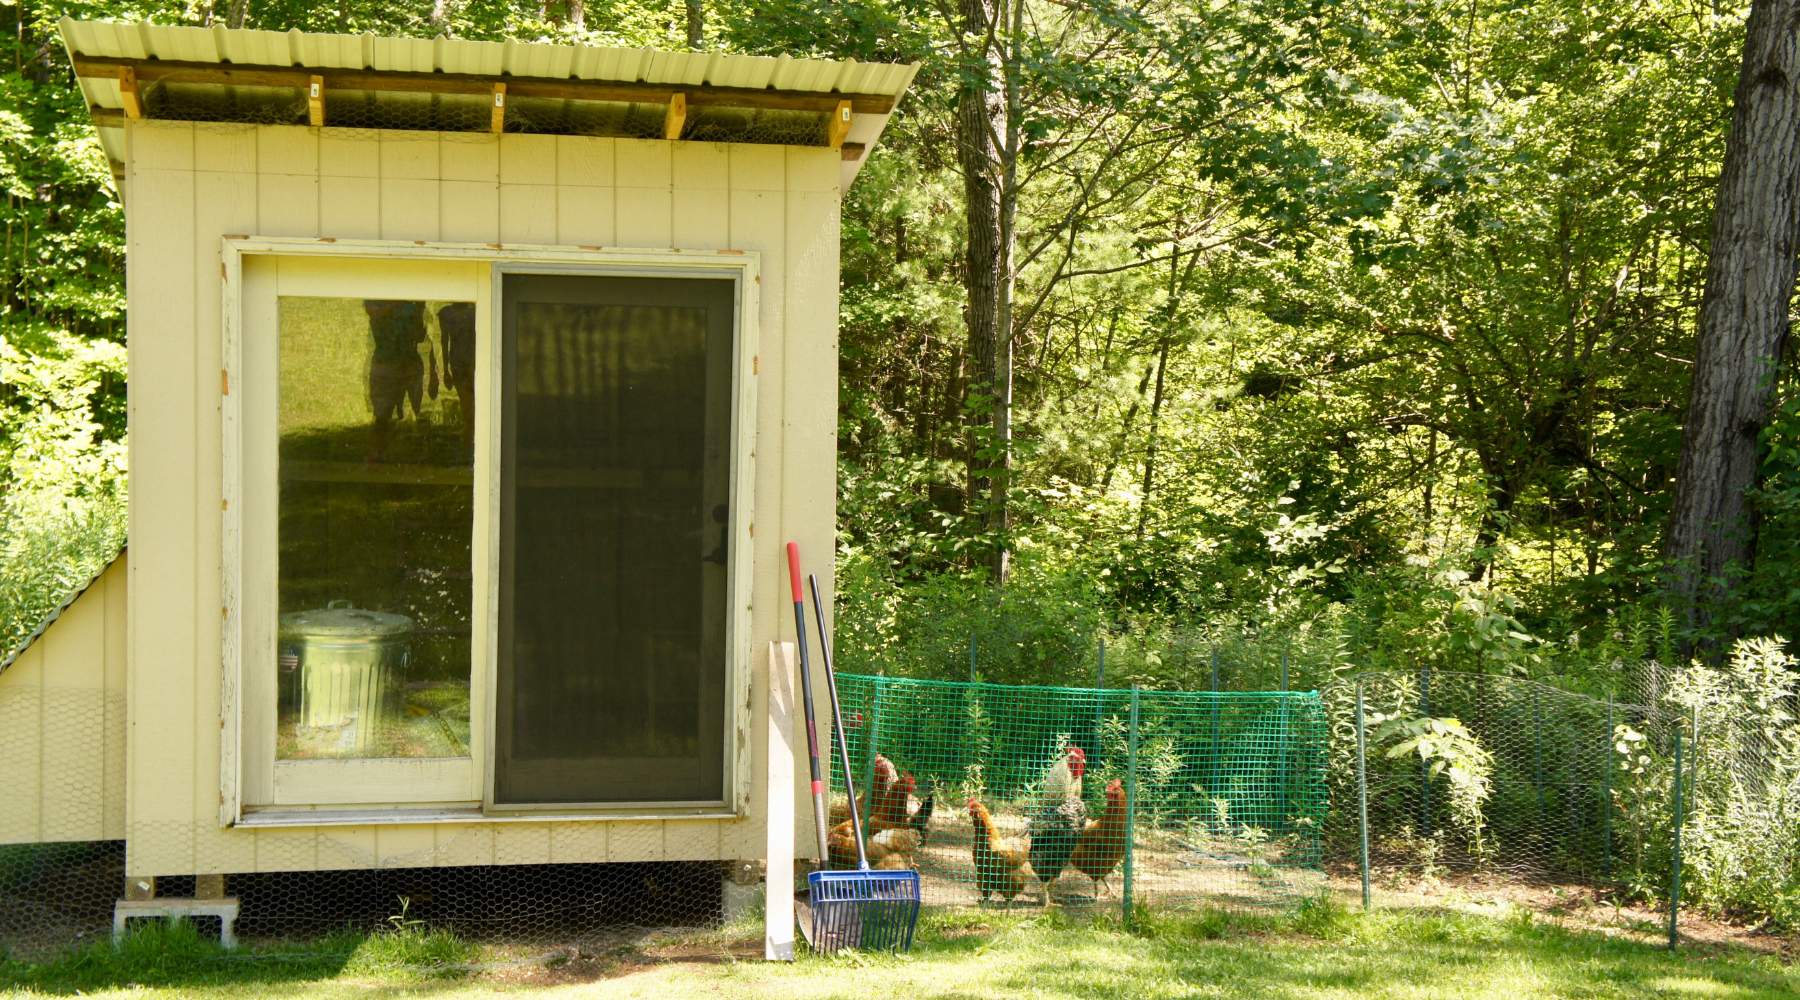 How Big Should a Chicken Coop Be? Essential Tips for Sizing Your Coop